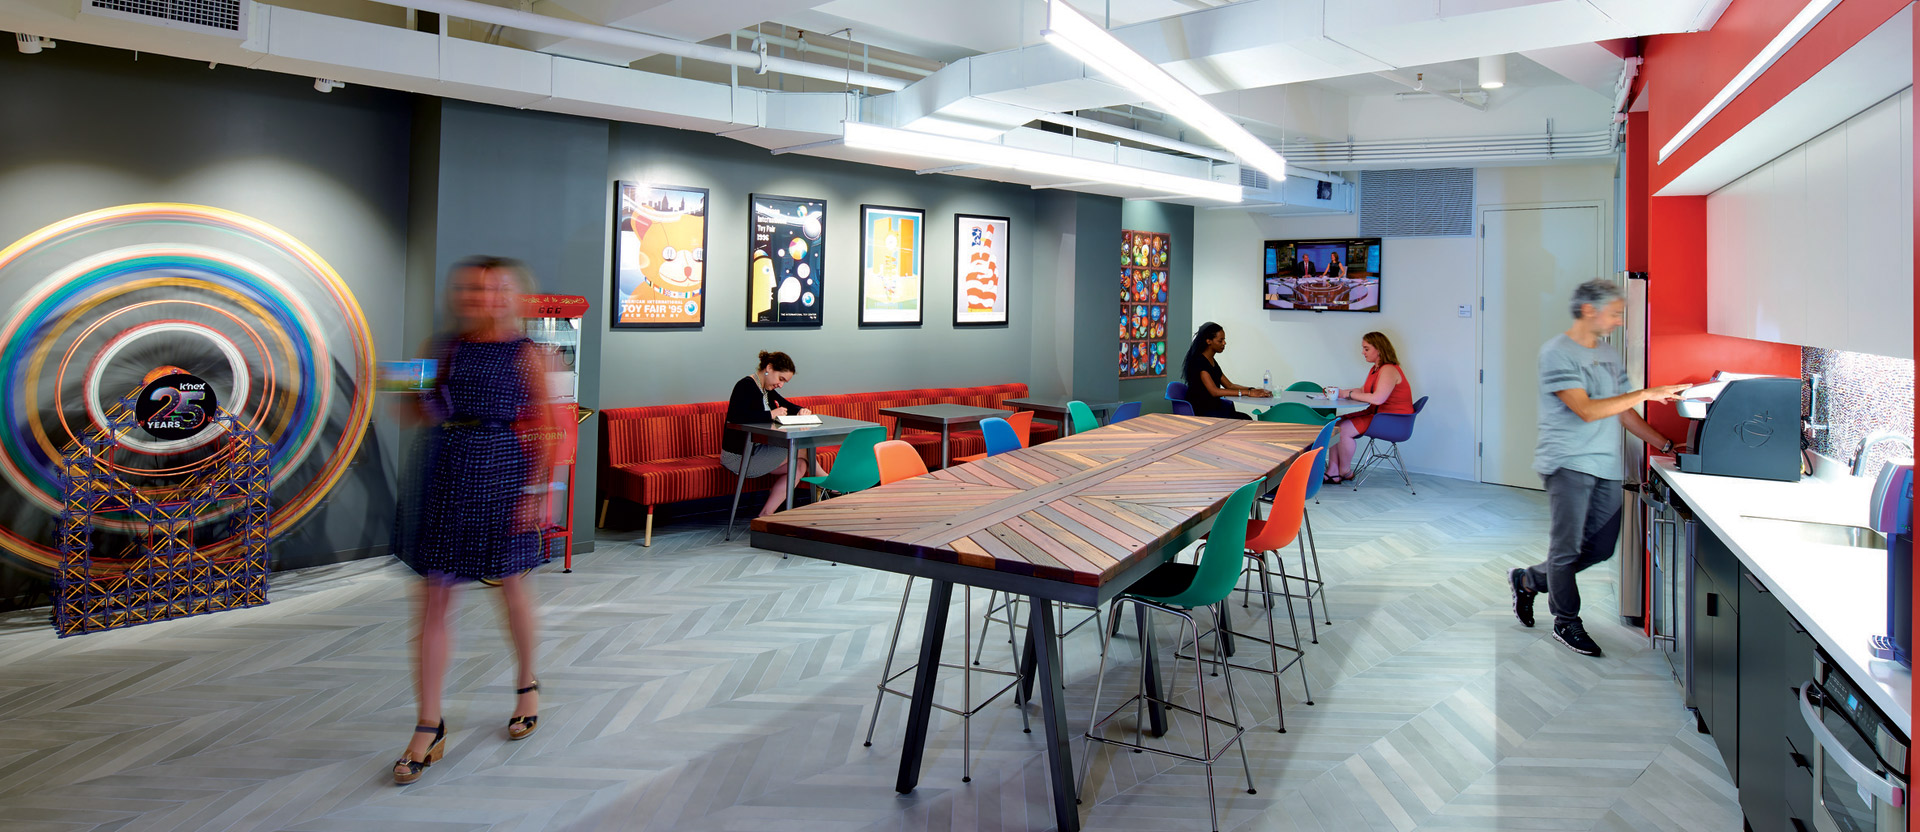 Modern office space featuring herringbone-patterned flooring, vibrant red and blue accents on walls and furniture, dynamic lighting, and contemporary artwork creating a lively, creative environment. Occupants engage in various activities within the collaborative, open-plan setting.